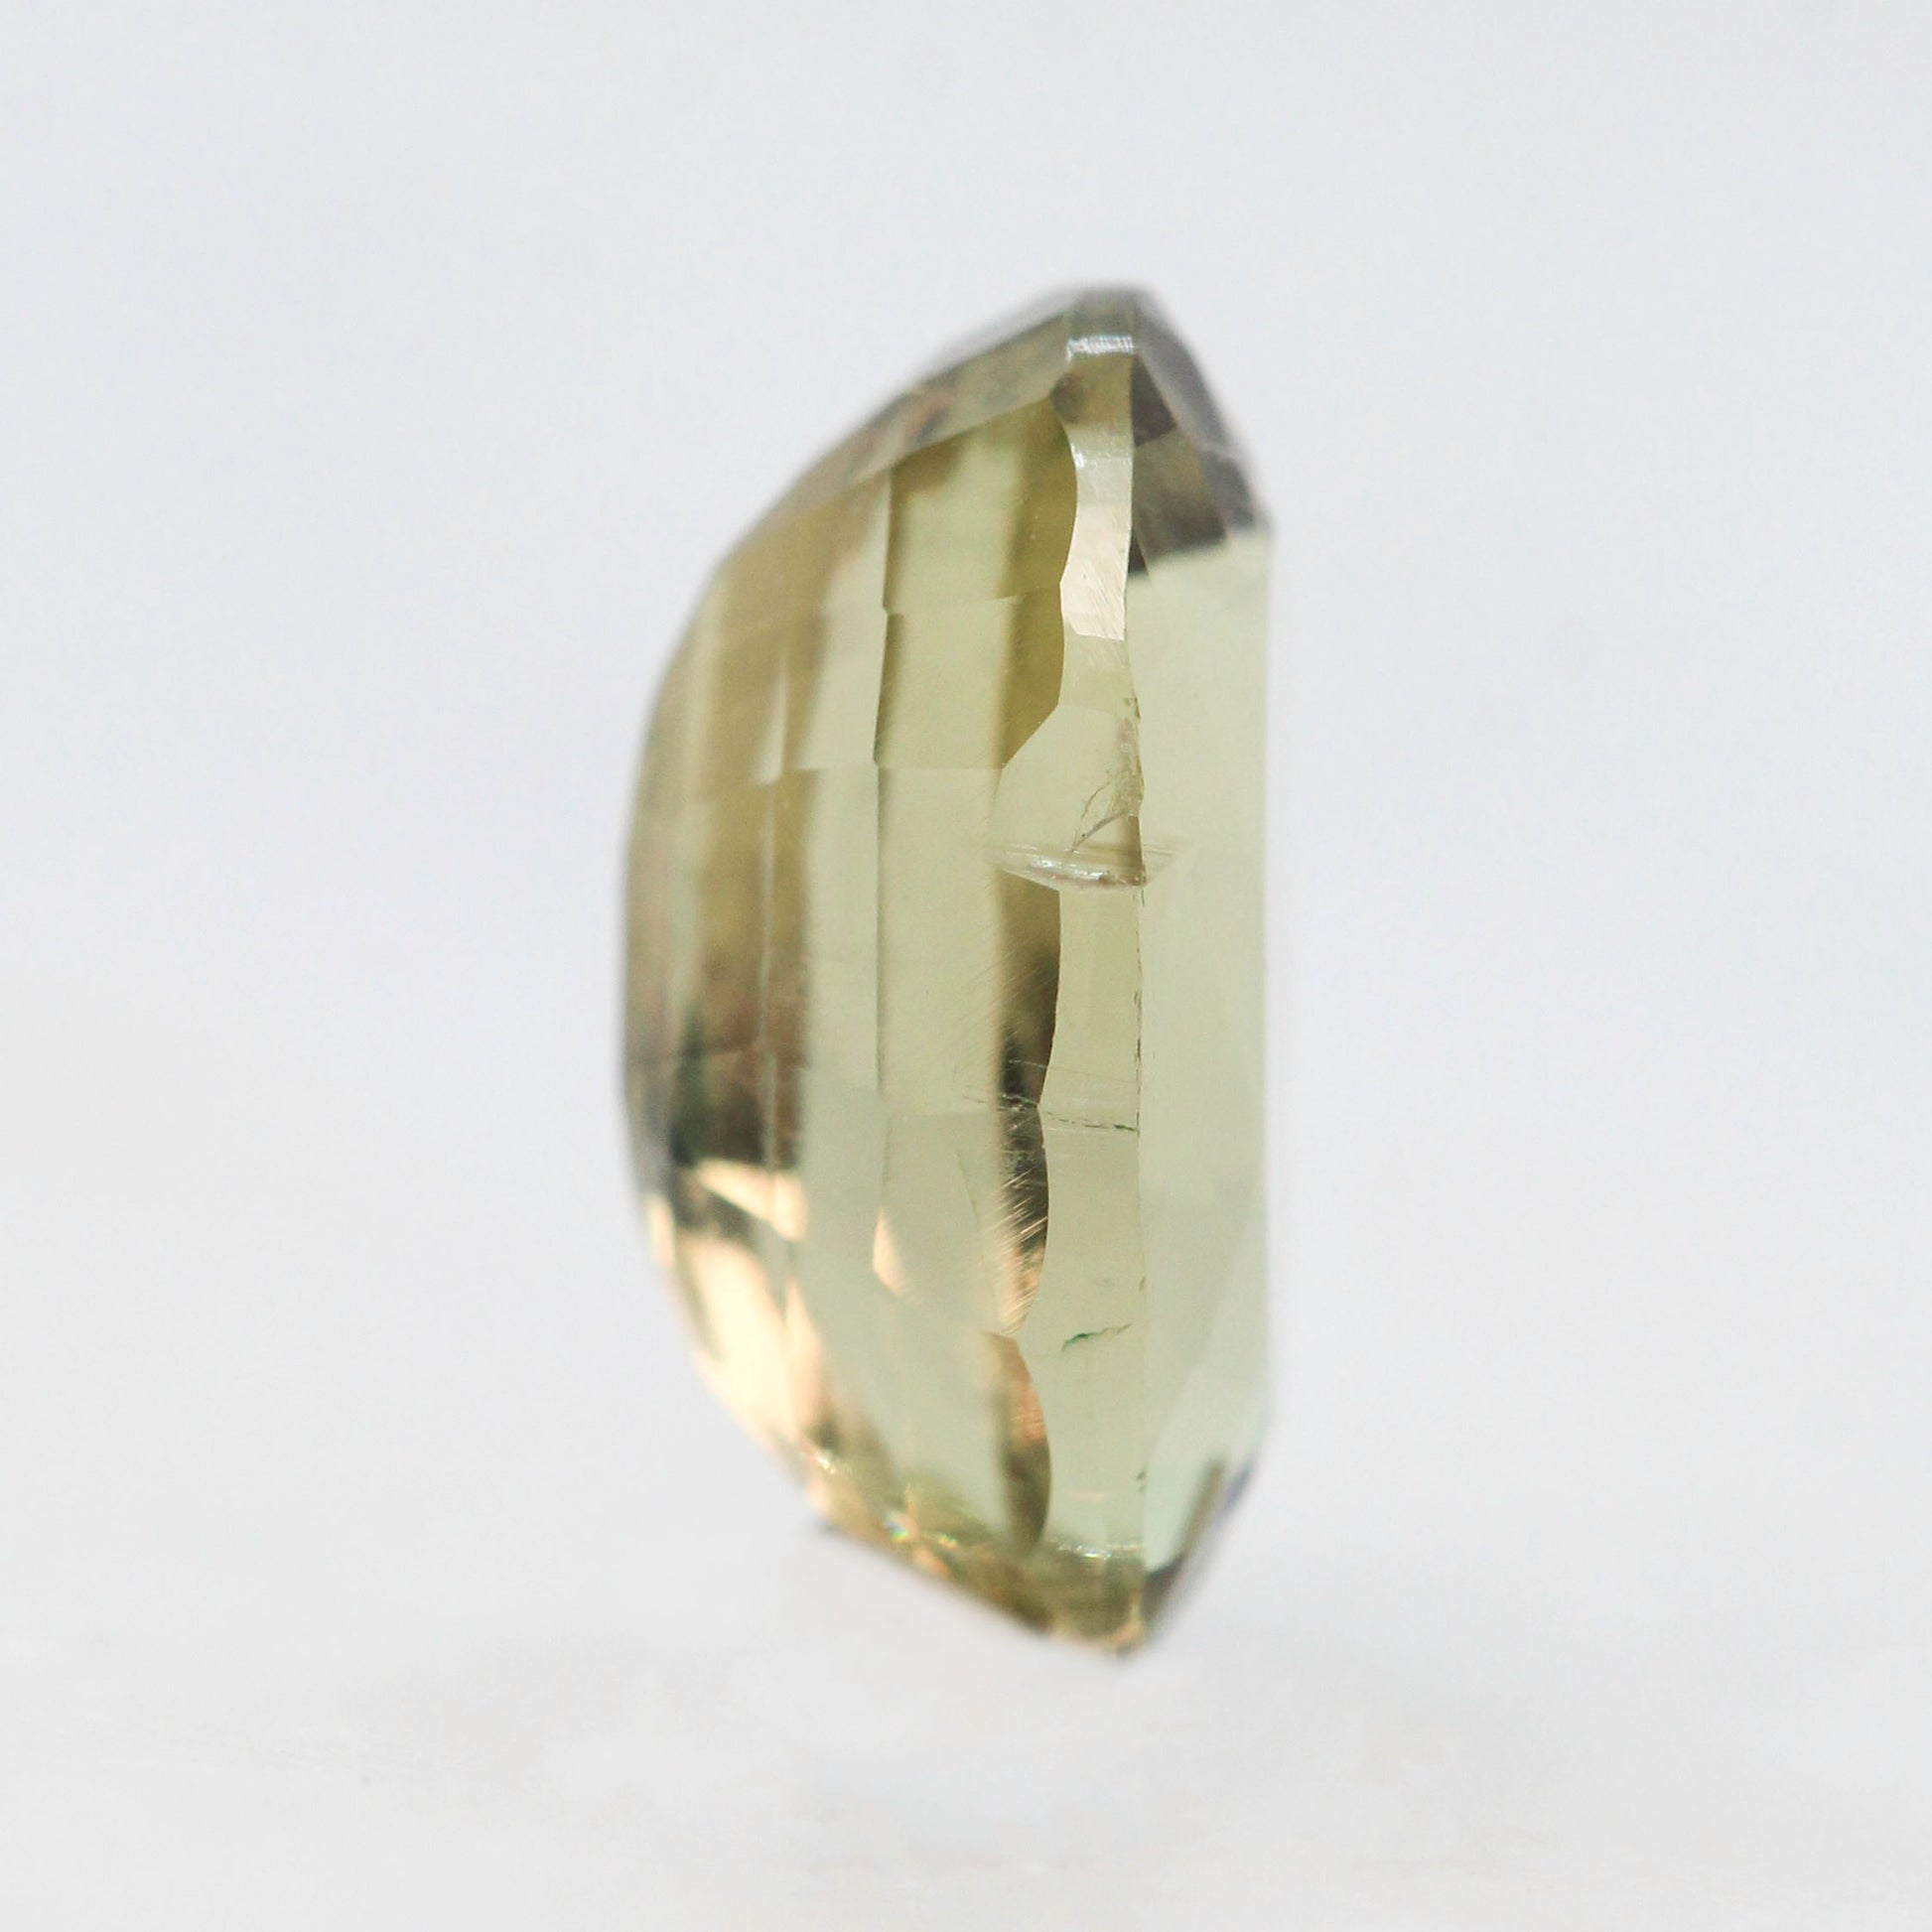 3.40 Carat Yellow-Green Oval Sapphire for Custom Work - Inventory Code YGOS340 - Midwinter Co. Alternative Bridal Rings and Modern Fine Jewelry